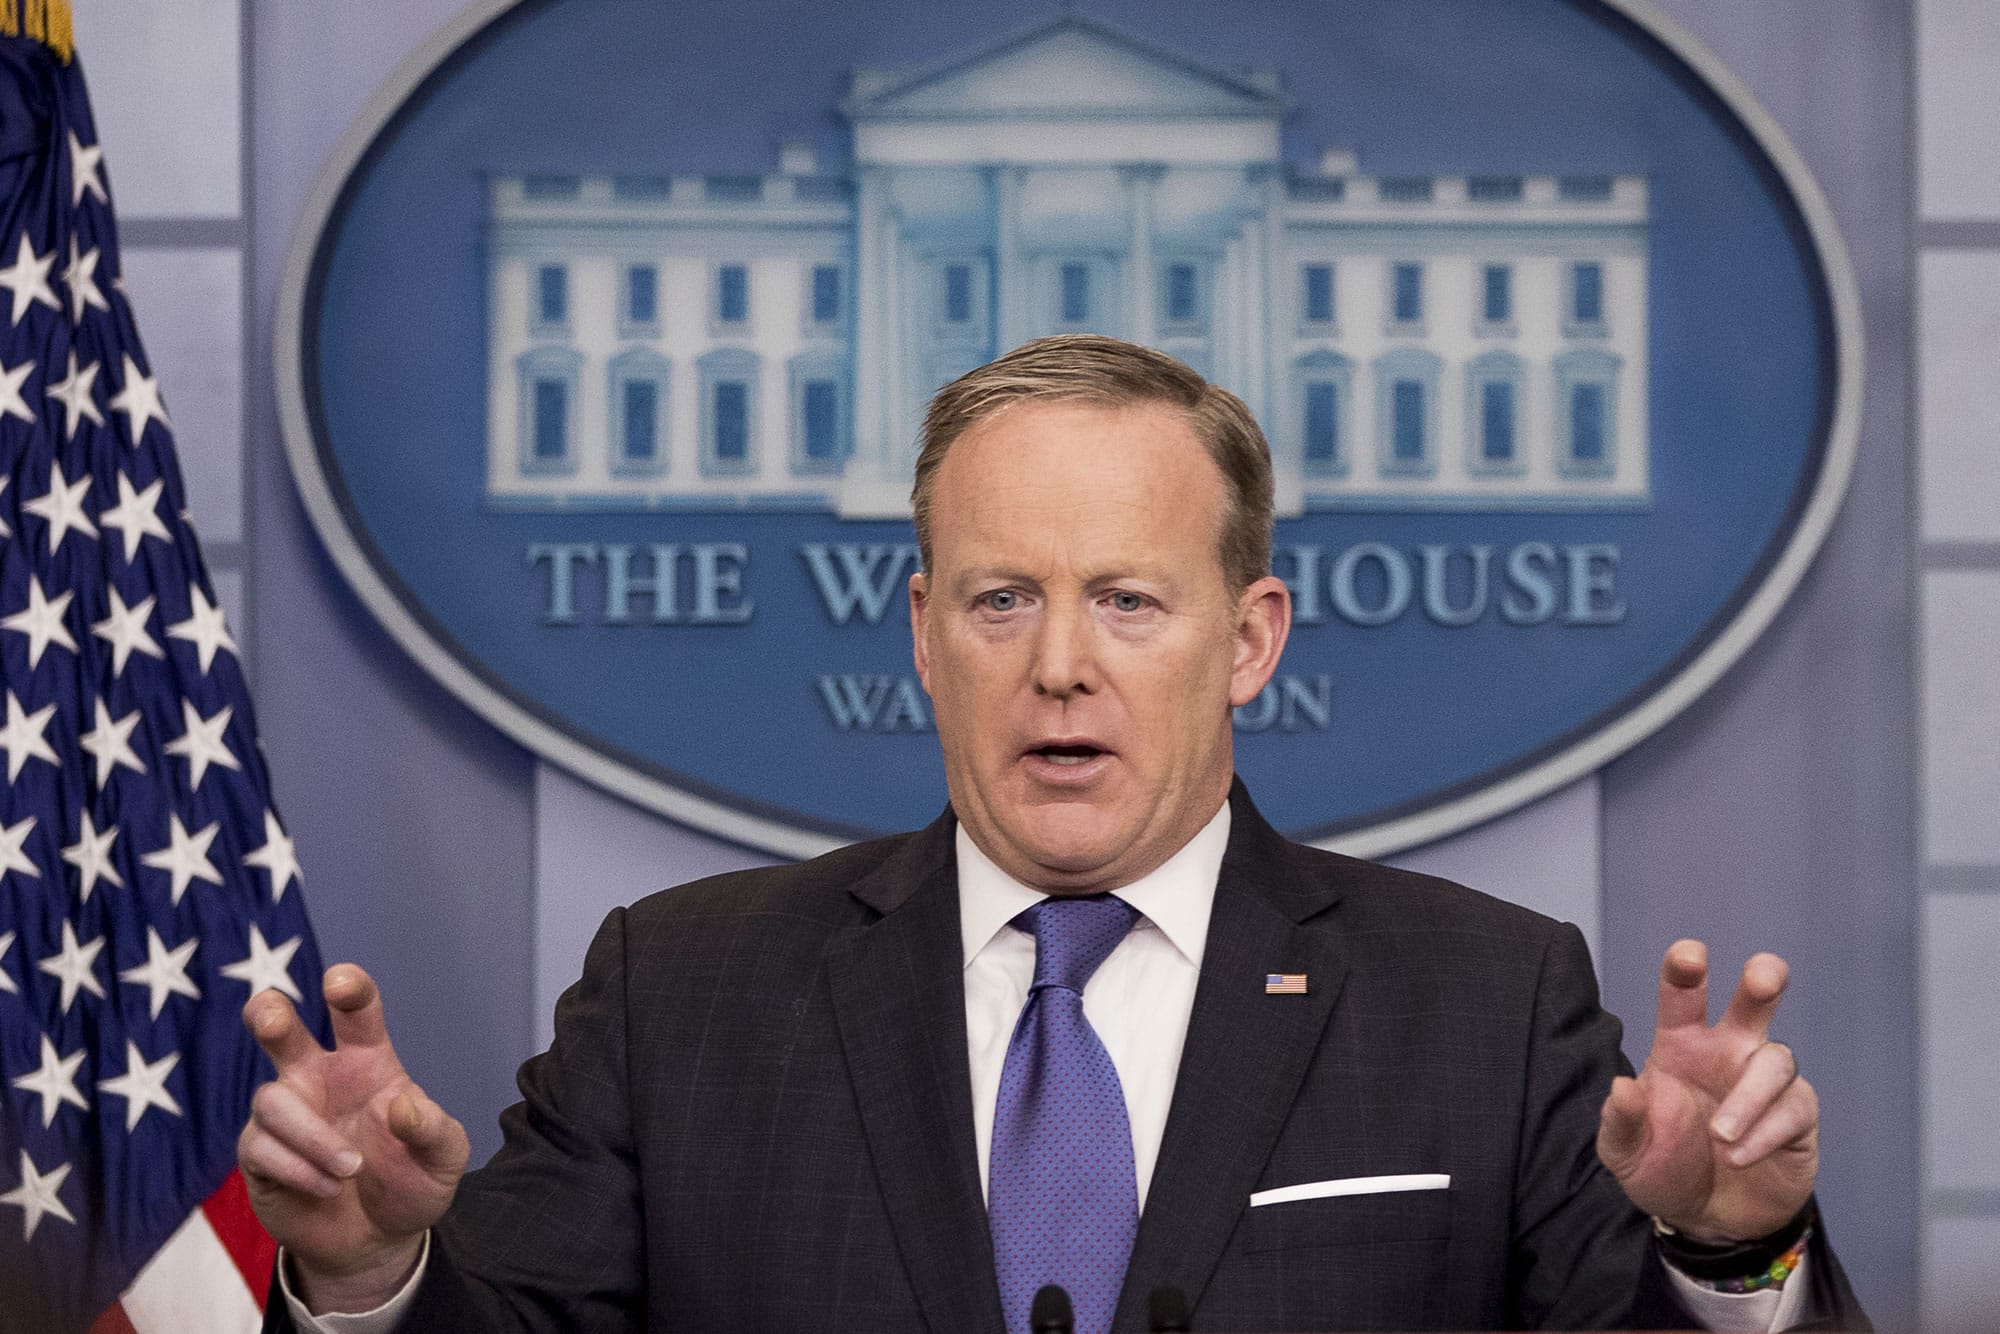 White House press secretary Sean Spicer speaks during the daily press briefing at the White House in Washington, Monday, March 13, 2017. Spicer discussed surveillance during the 2016 presidential campaign, North Korea, anti-Semitic attacks and other topics.